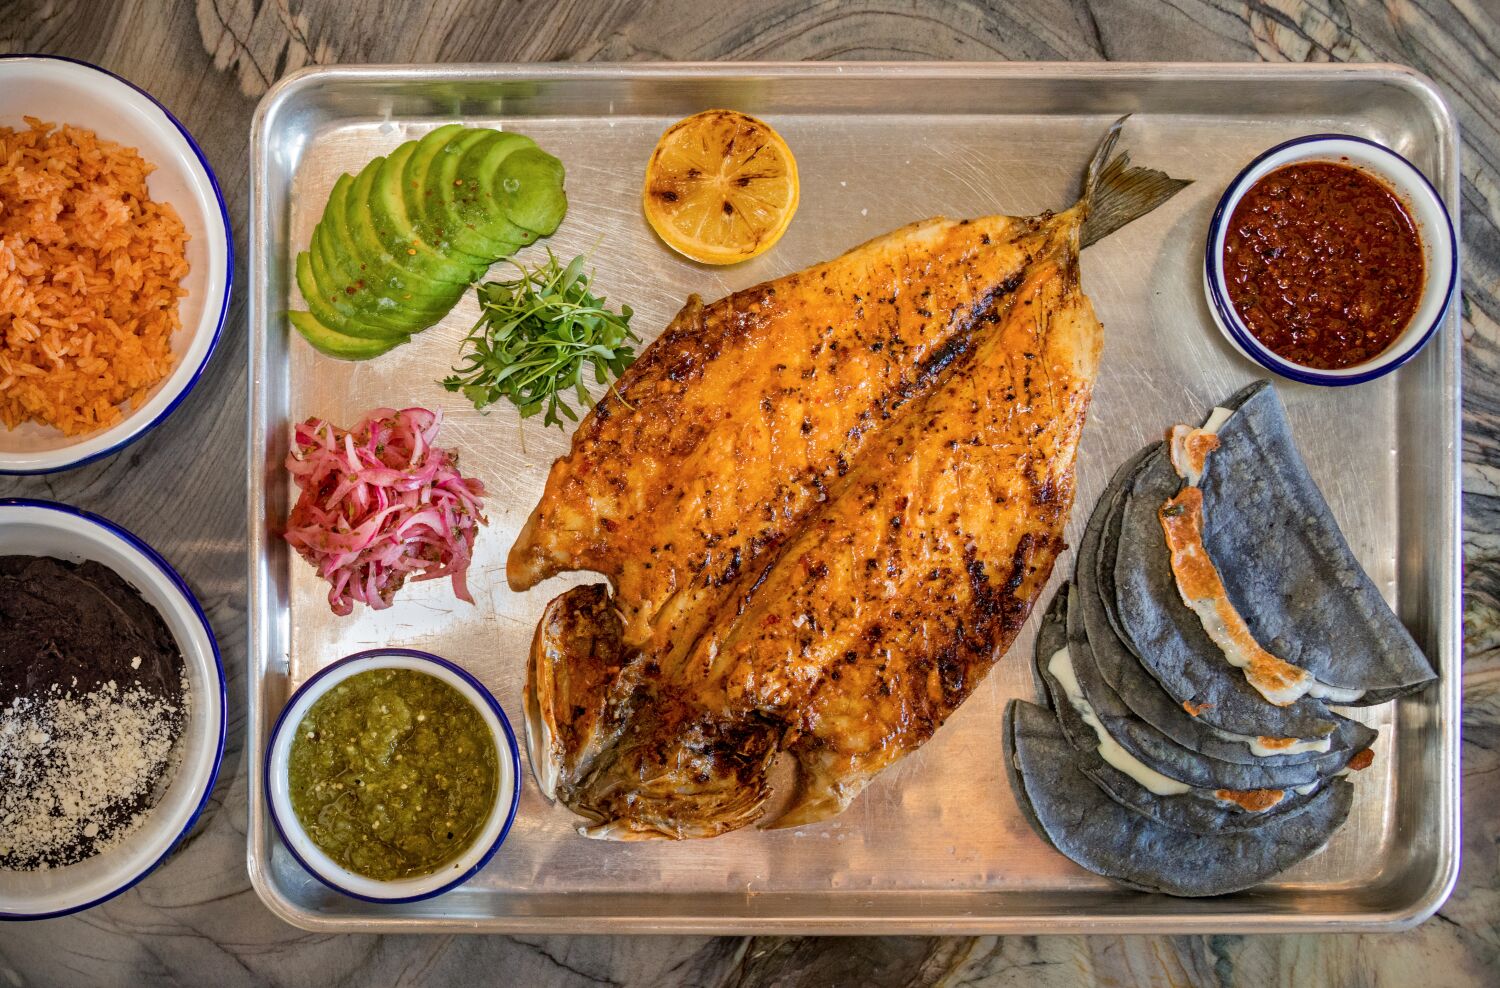 A Mexico City restaurateur taps into L.A. culture at Frogtown's mariscos newcomer